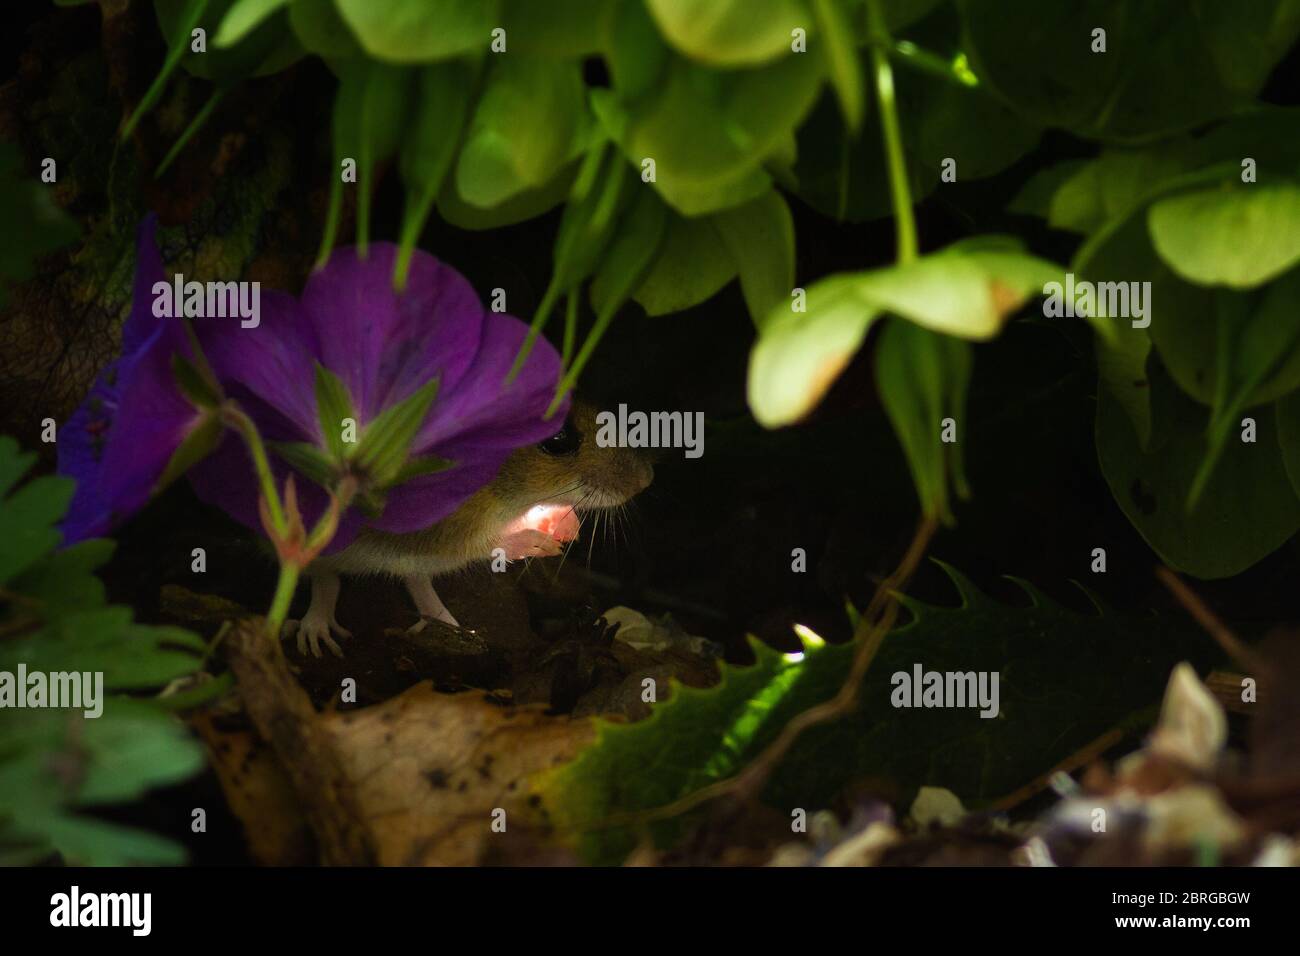 21 May 2020: Uk Wildlife: Field mouse (also known as wood mouse (Apodemus sylvaticus)) in garden undergrowth catching the sunlight in its hands. West Yorkshire, UK.  Rebecca Cole/Alamy News (c) Stock Photo